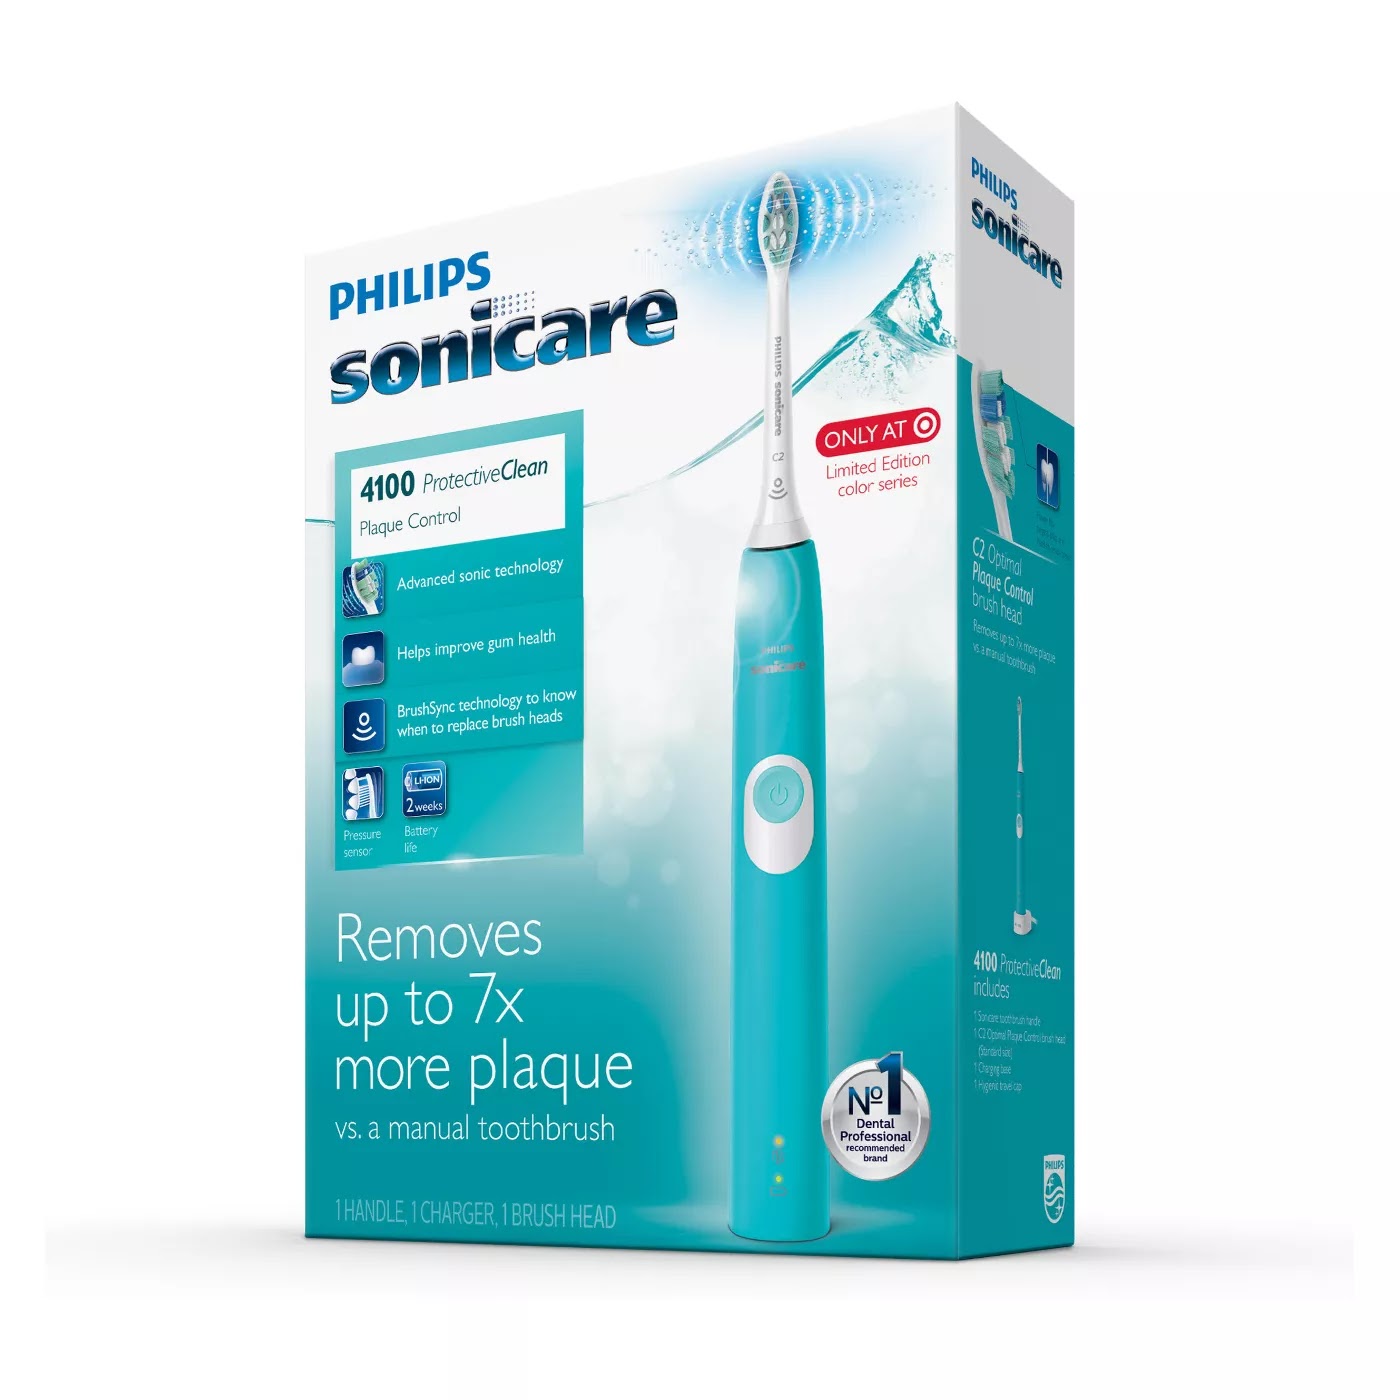 philips-sonicare-4100-electric-toothbrush-34-99-save-25